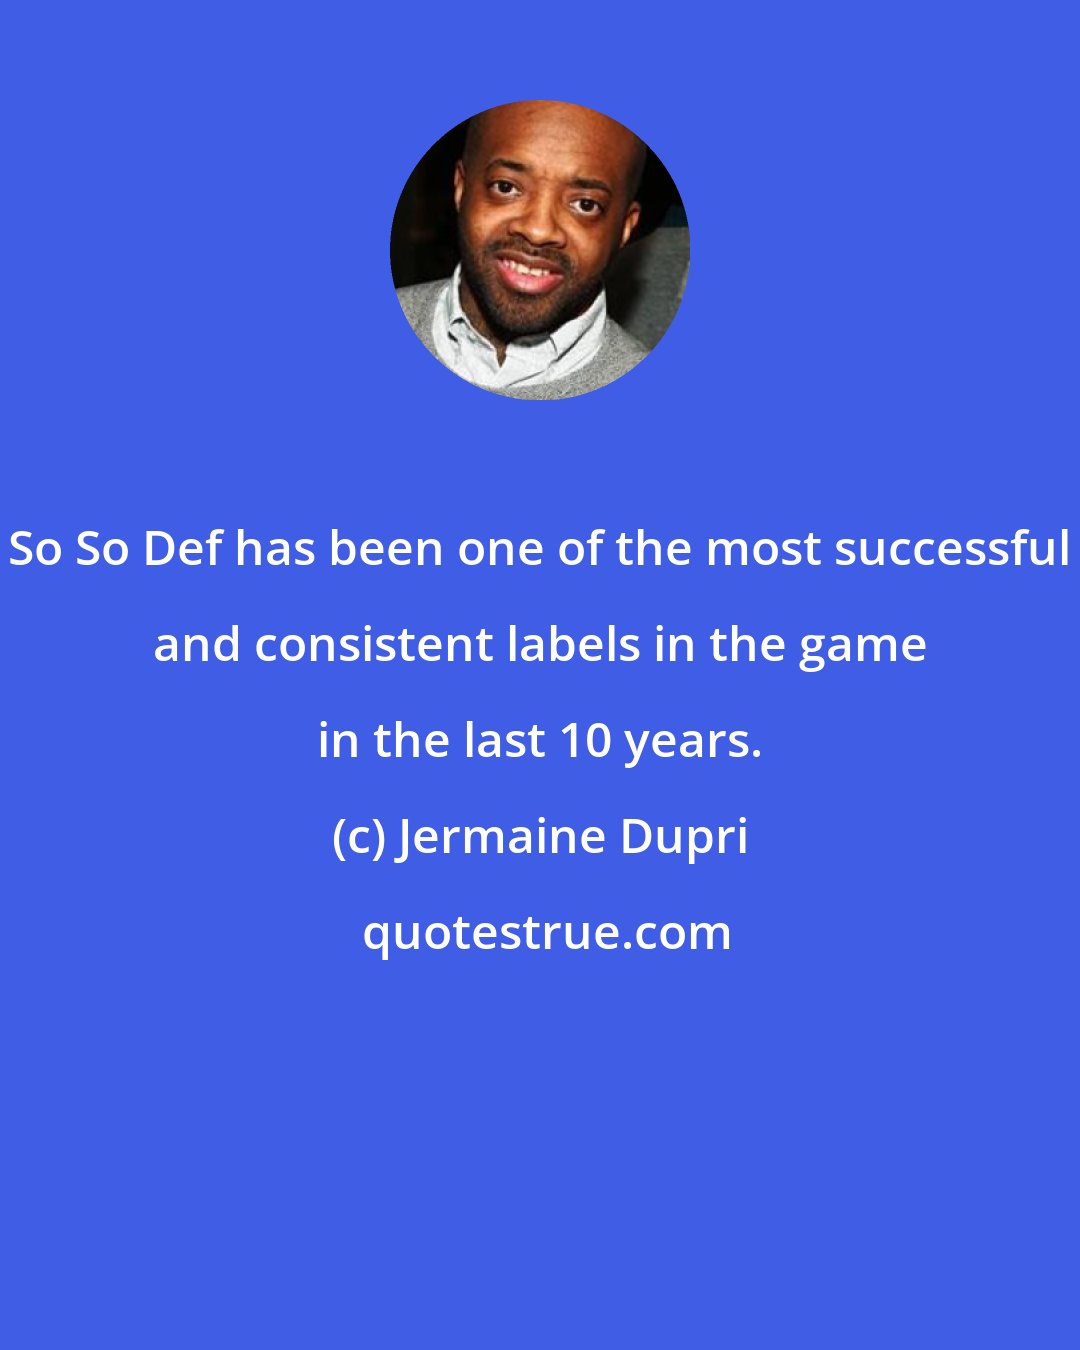 Jermaine Dupri: So So Def has been one of the most successful and consistent labels in the game in the last 10 years.